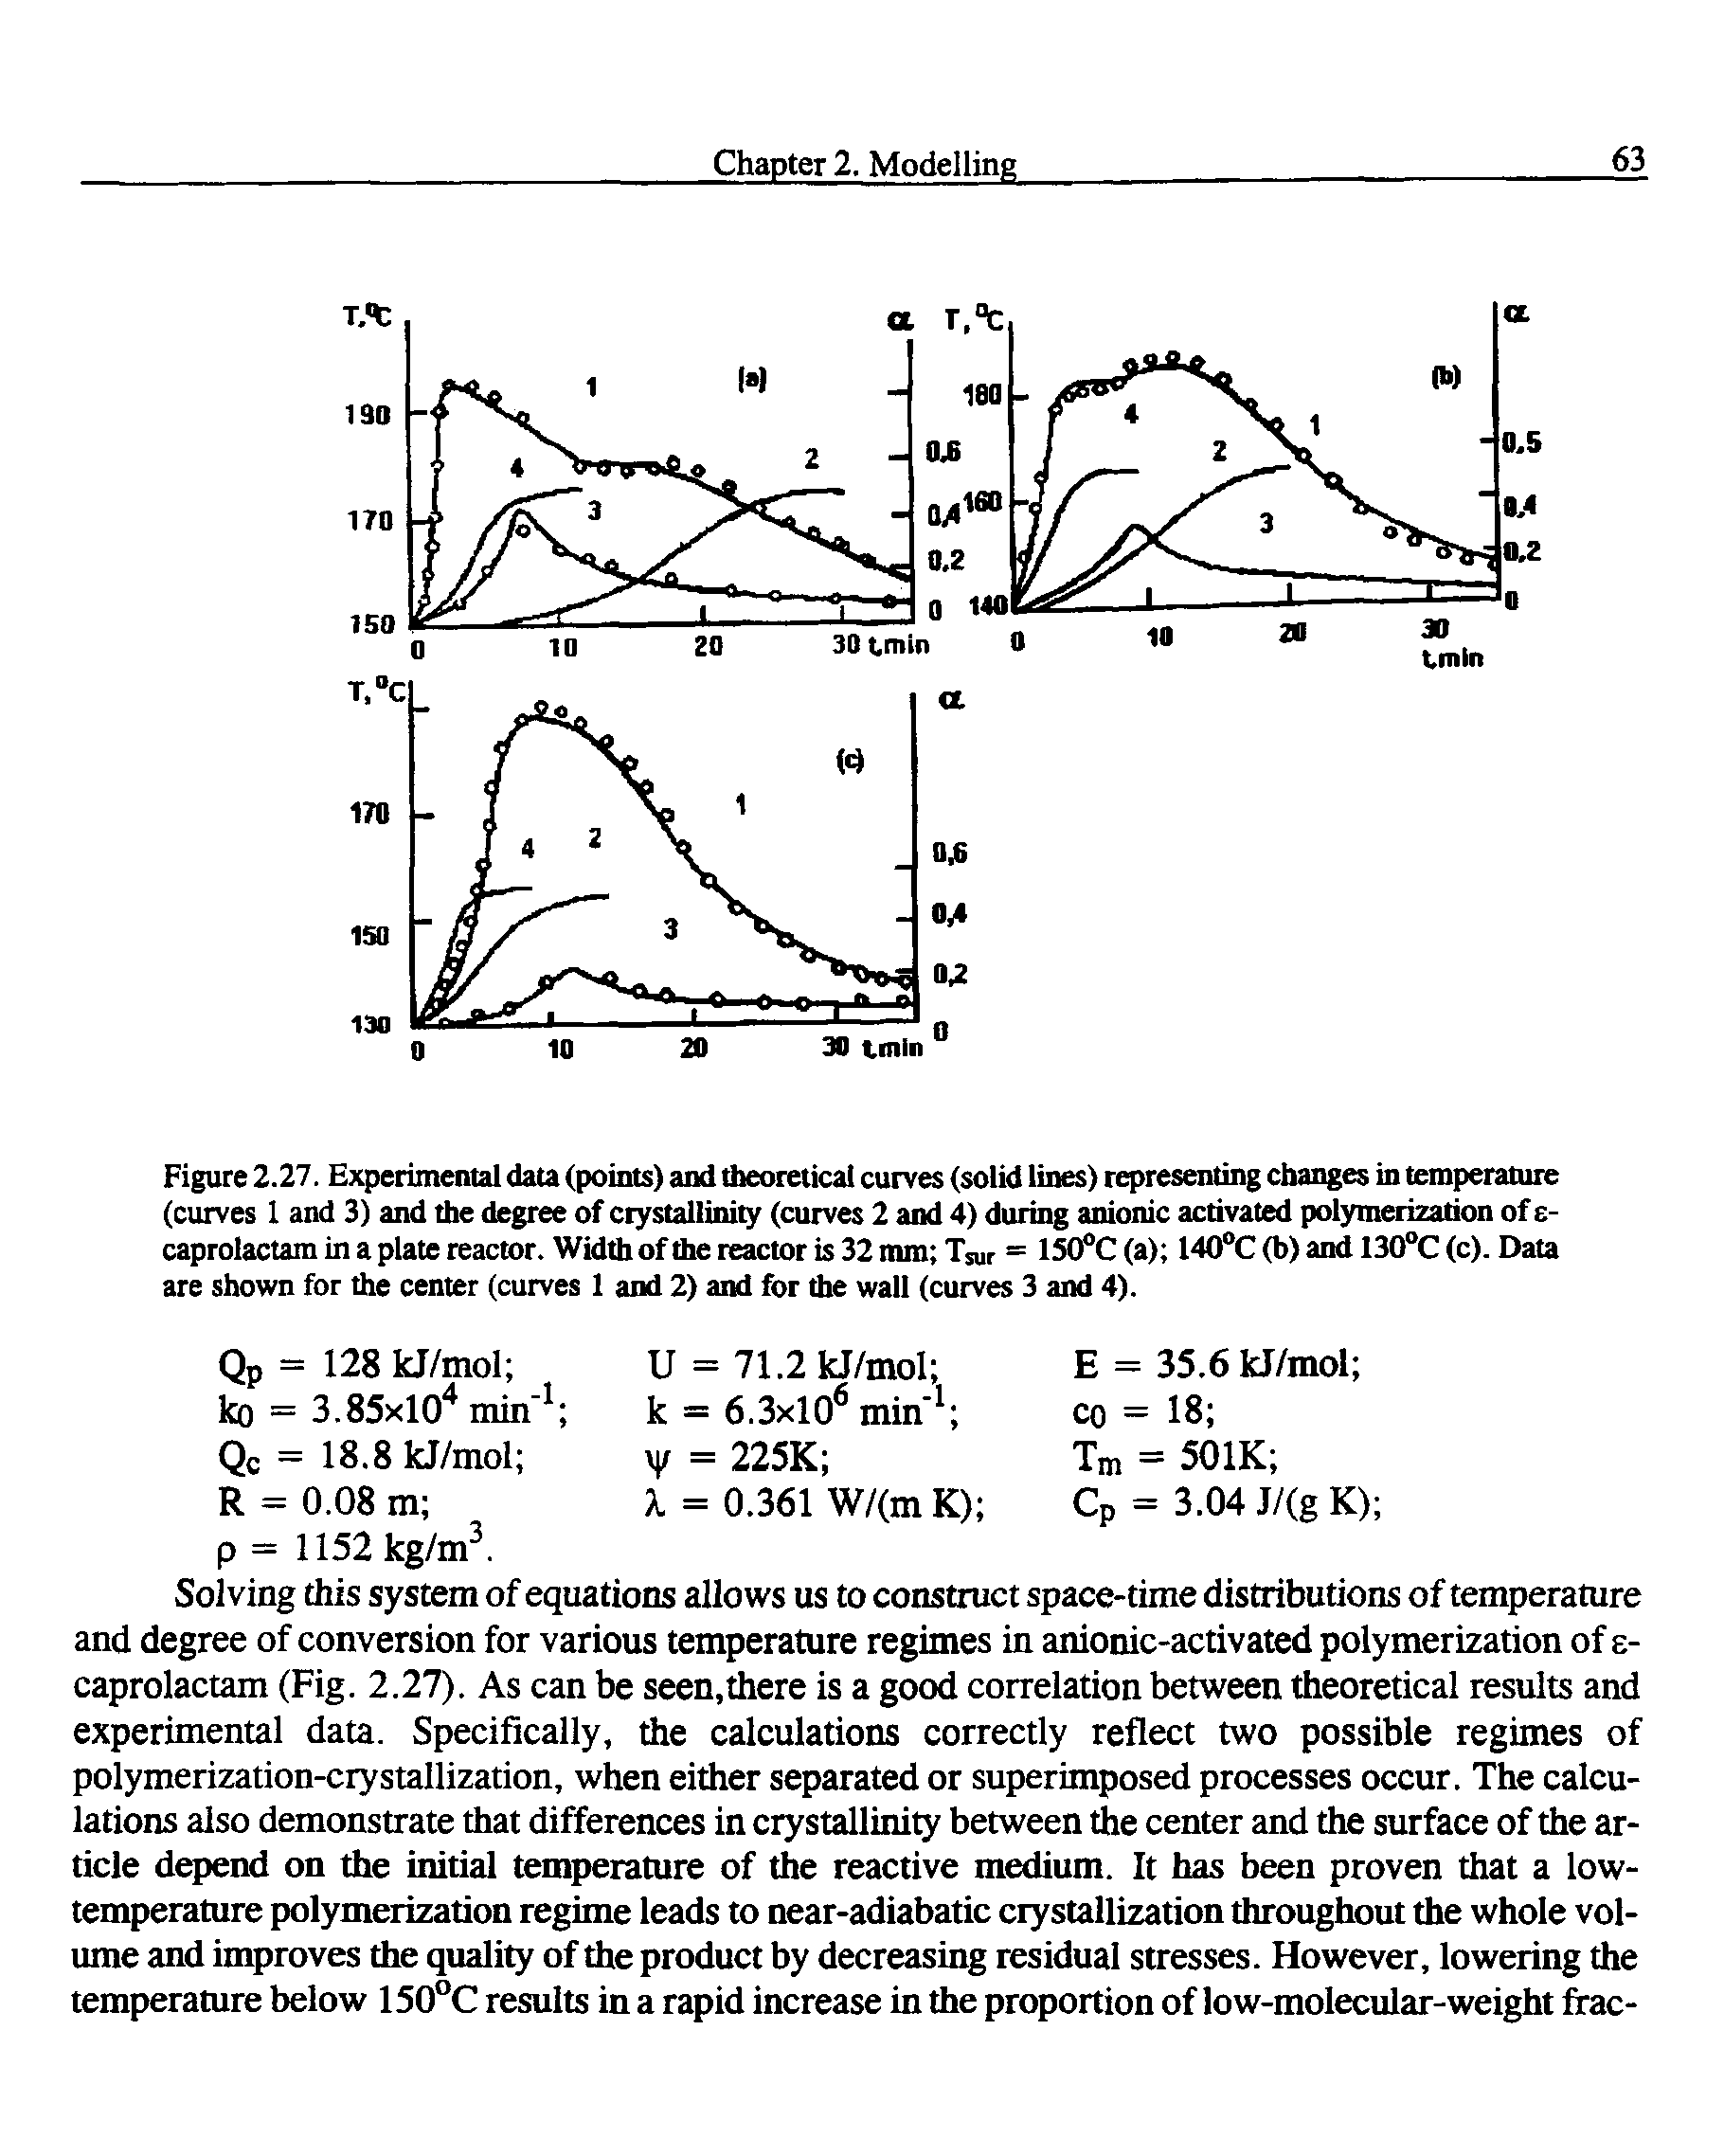 Figure 2.27. Experimental data (points) and theoretical curves (solid lines) representing changes in temperature (curves 1 and 3) and the degree of crystallinity (curves 2 and 4) during anionic activated polymerization of e-caprolactam in a plate reactor. Width of the reactor is 32 mm Tsur = 150°C (a) 140°C (b) and 130°C (c). Data are shown for the center (curves 1 and 2) and for the wall (curves 3 and 4).